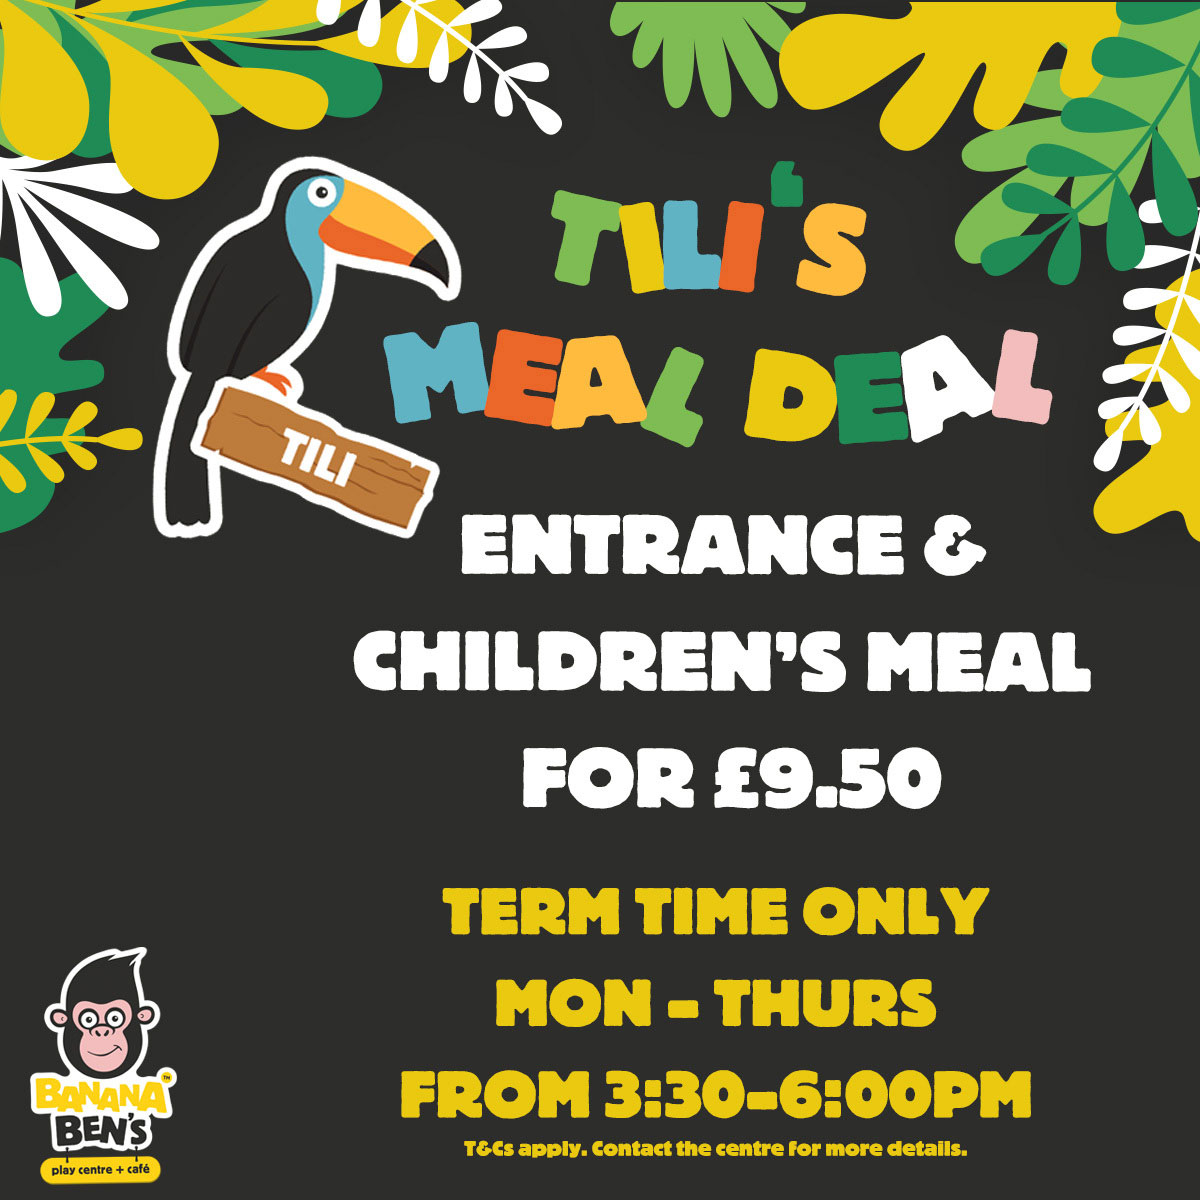 Meal deal is available for £9.50 on Mon - Thurs 15:30 to 18:00 during term time